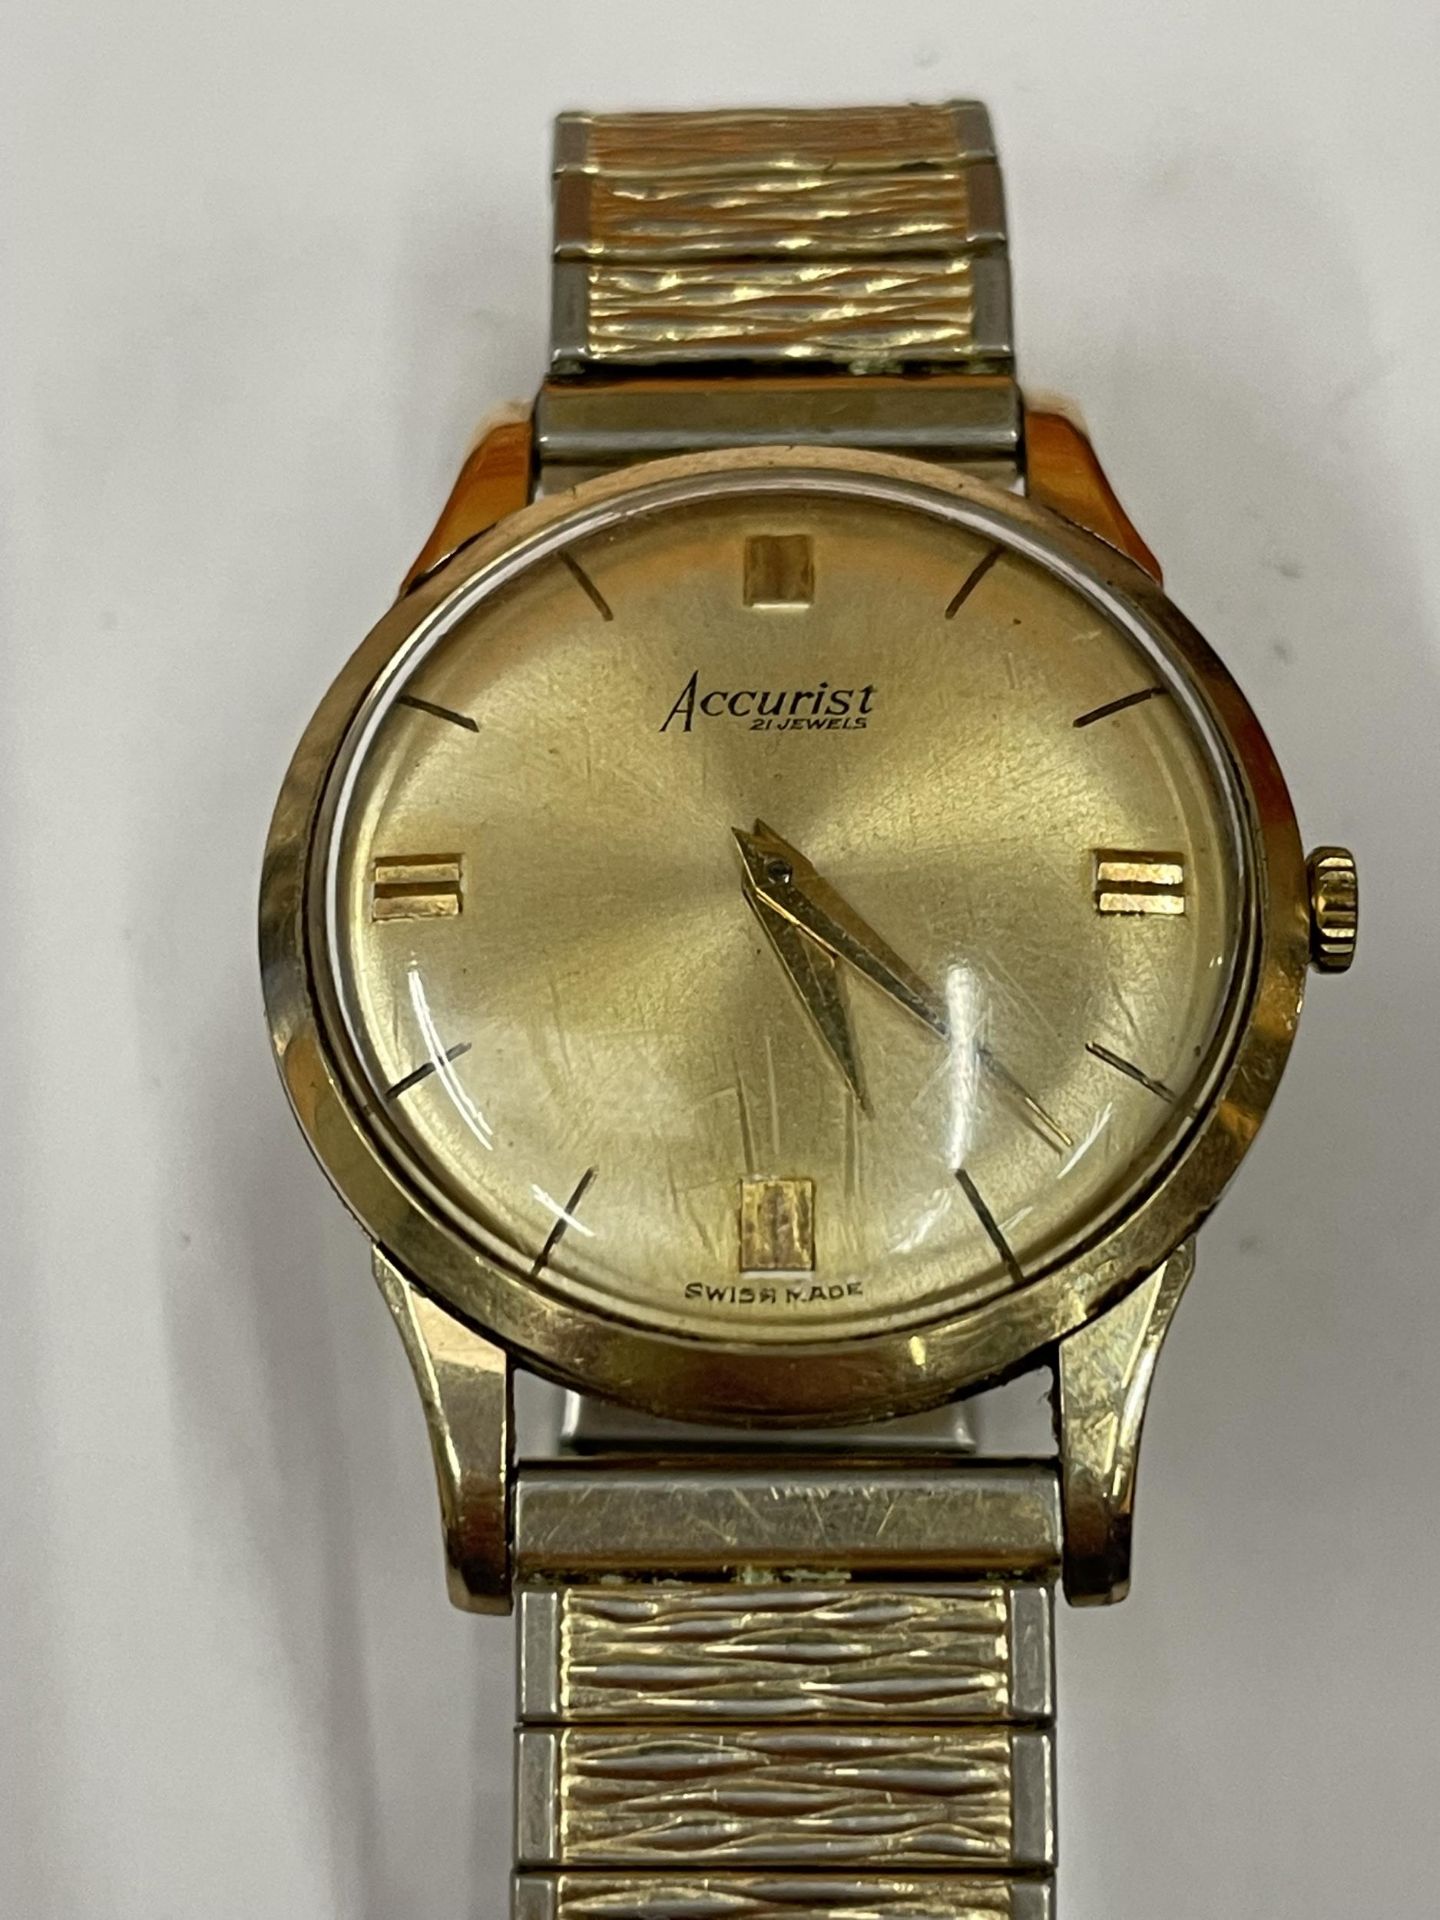 A ACCURIST 9 CARAT GOLD GENTS WRISTWRIST WITH A GOLD PLATED STRAP - Image 2 of 4